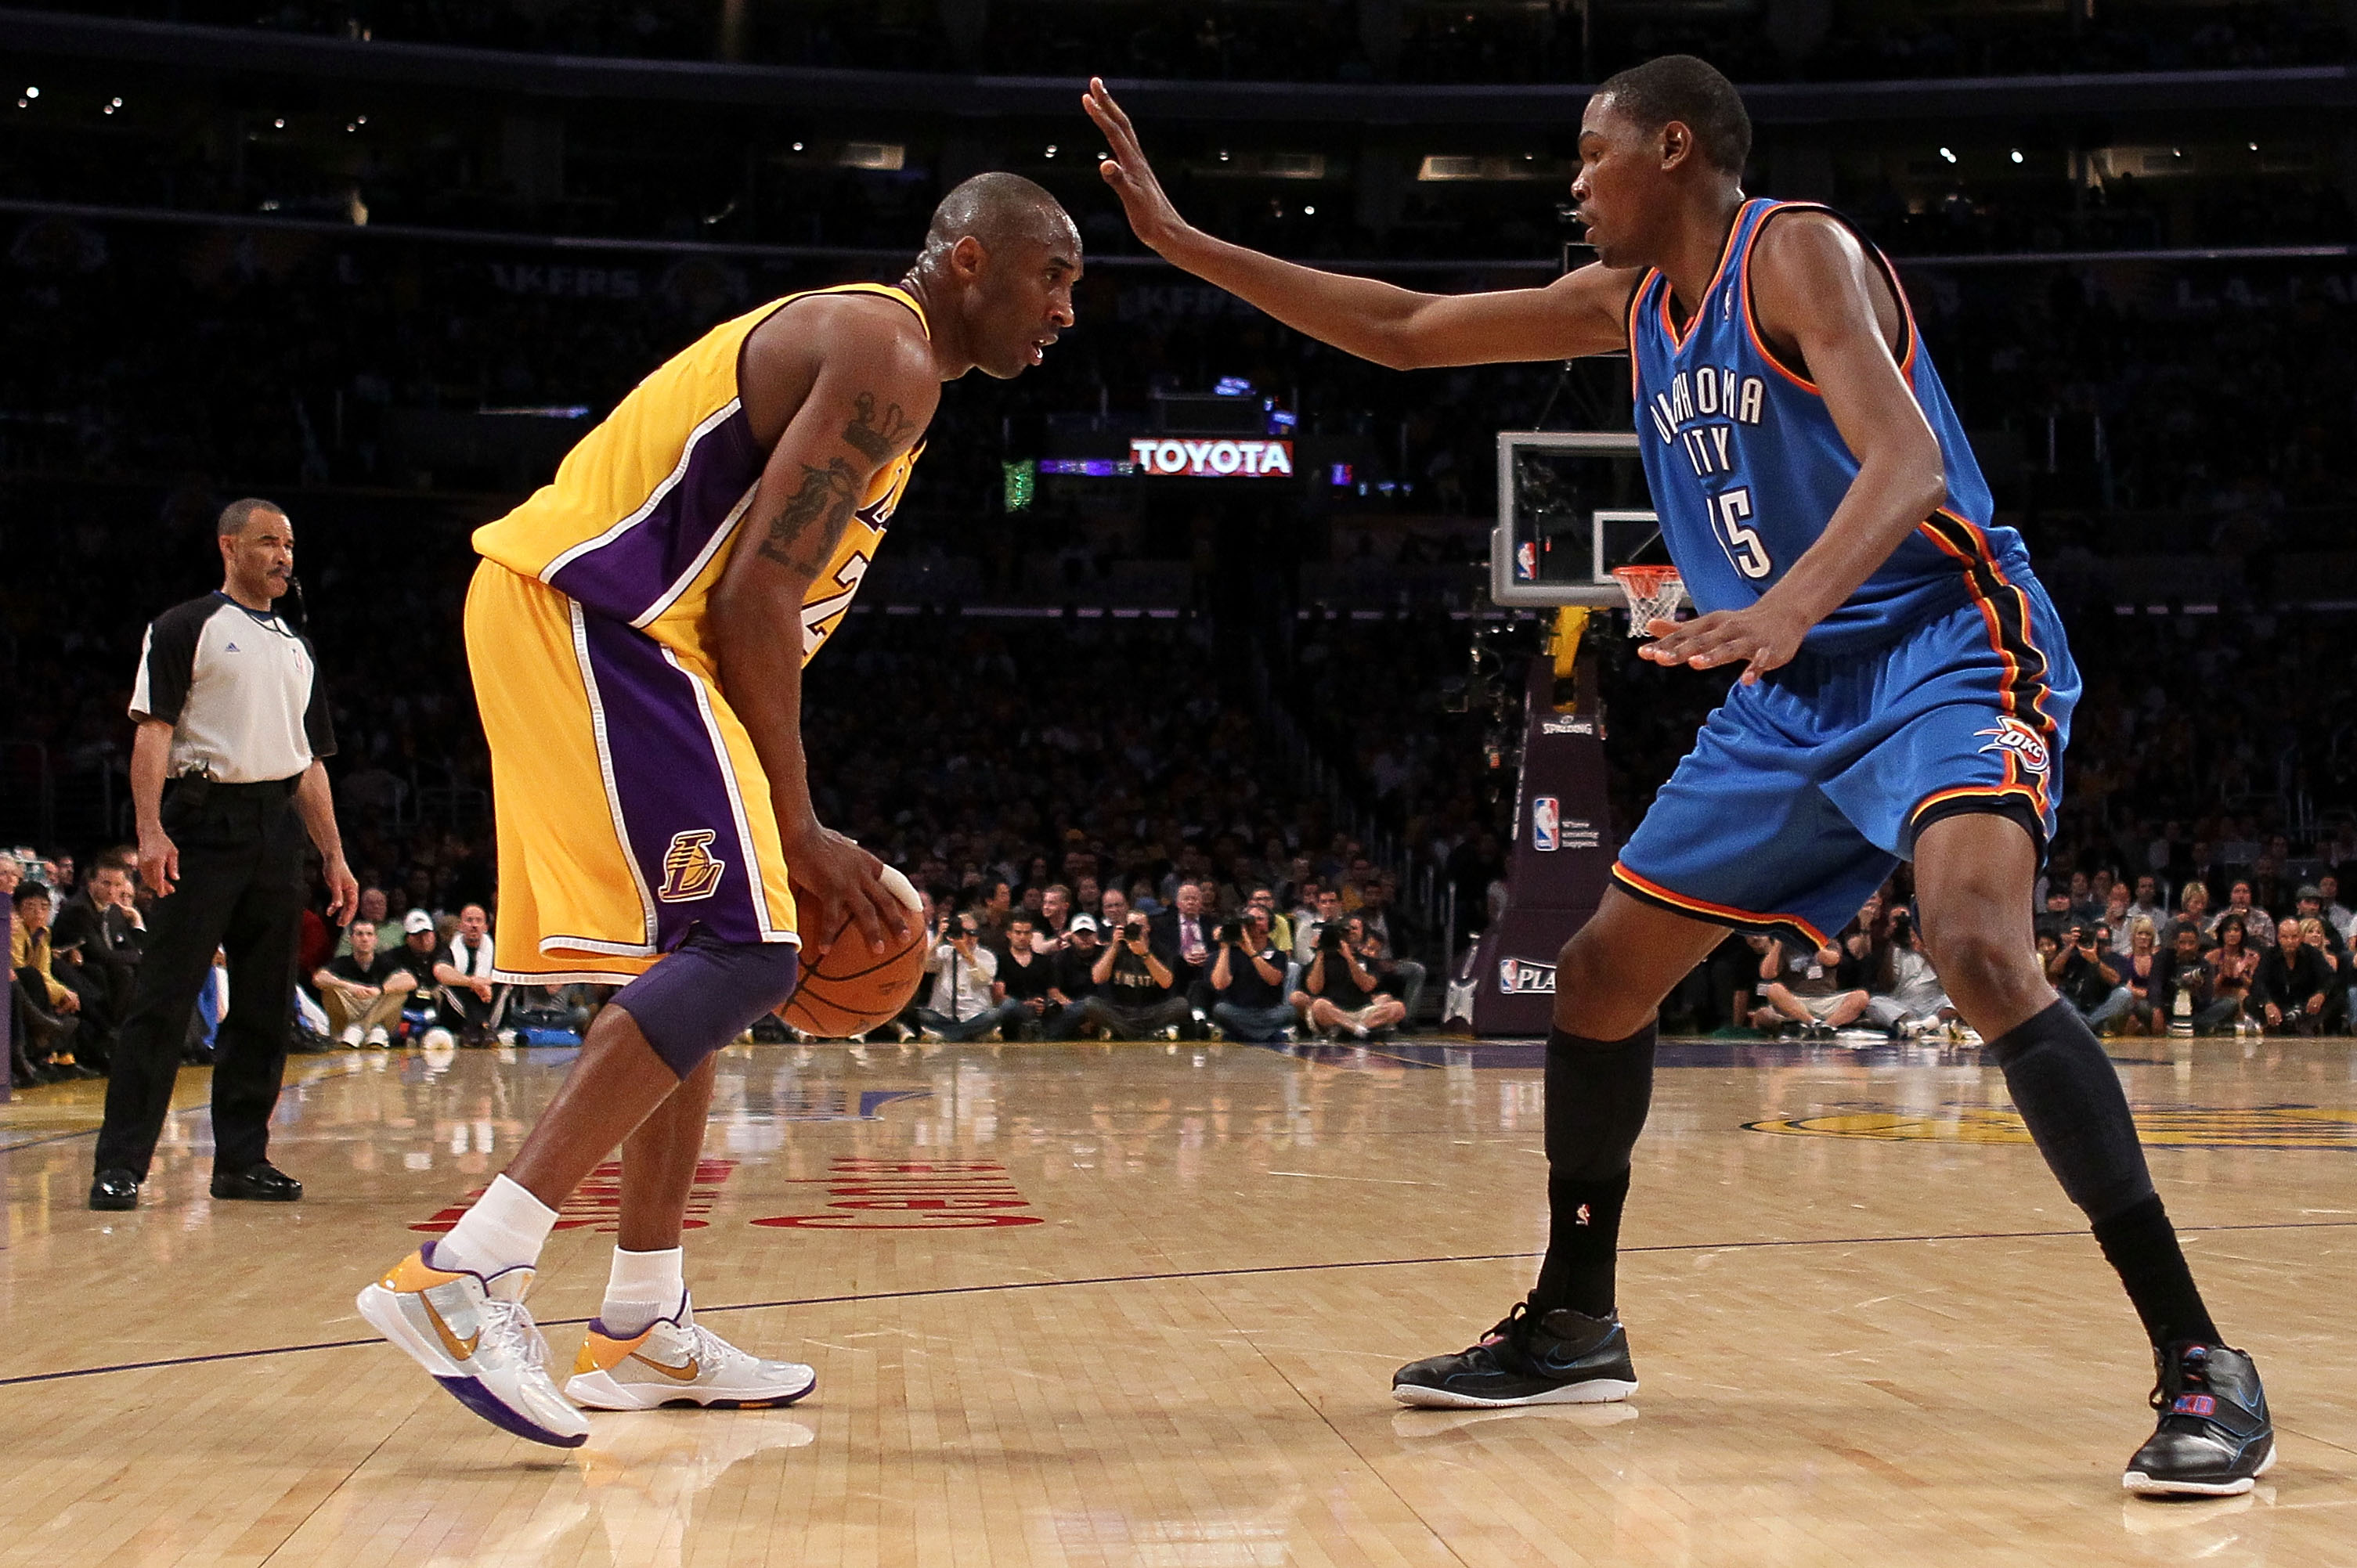 LOS ANGELES, CA - APRIL 27:  Kobe Bryant #24 of the Los Angeles Lakers looks to drive on Kevin Durant #35 of the Oklahoma City Thunder in the first half during Game Two of the Western Conference Quarterfinals of the 2010 NBA Playoffs at Staples Center on